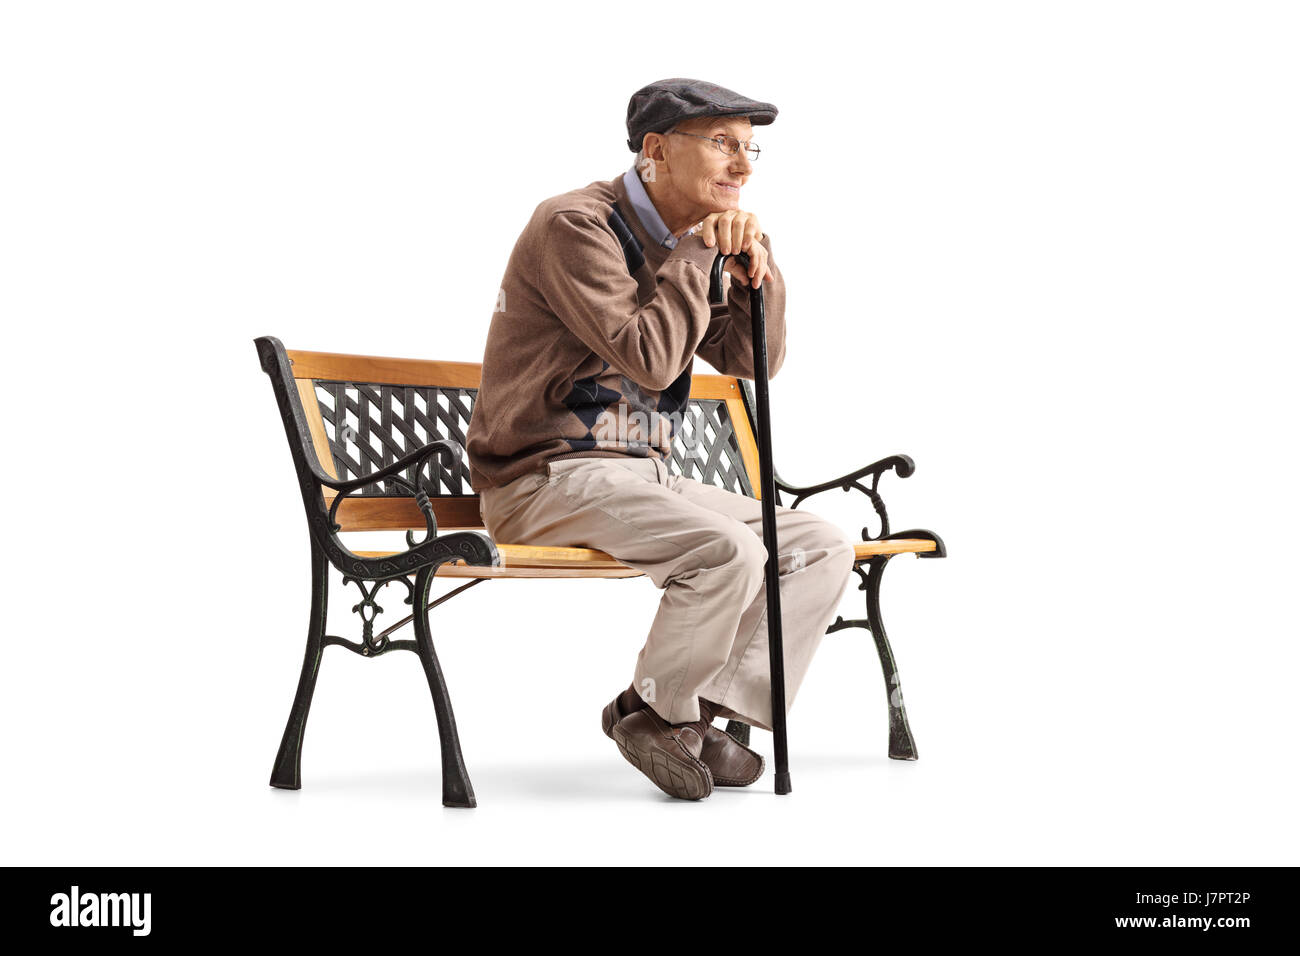 Pensive senior with a walking cane sitting on a bench isolated on white background Stock Photo